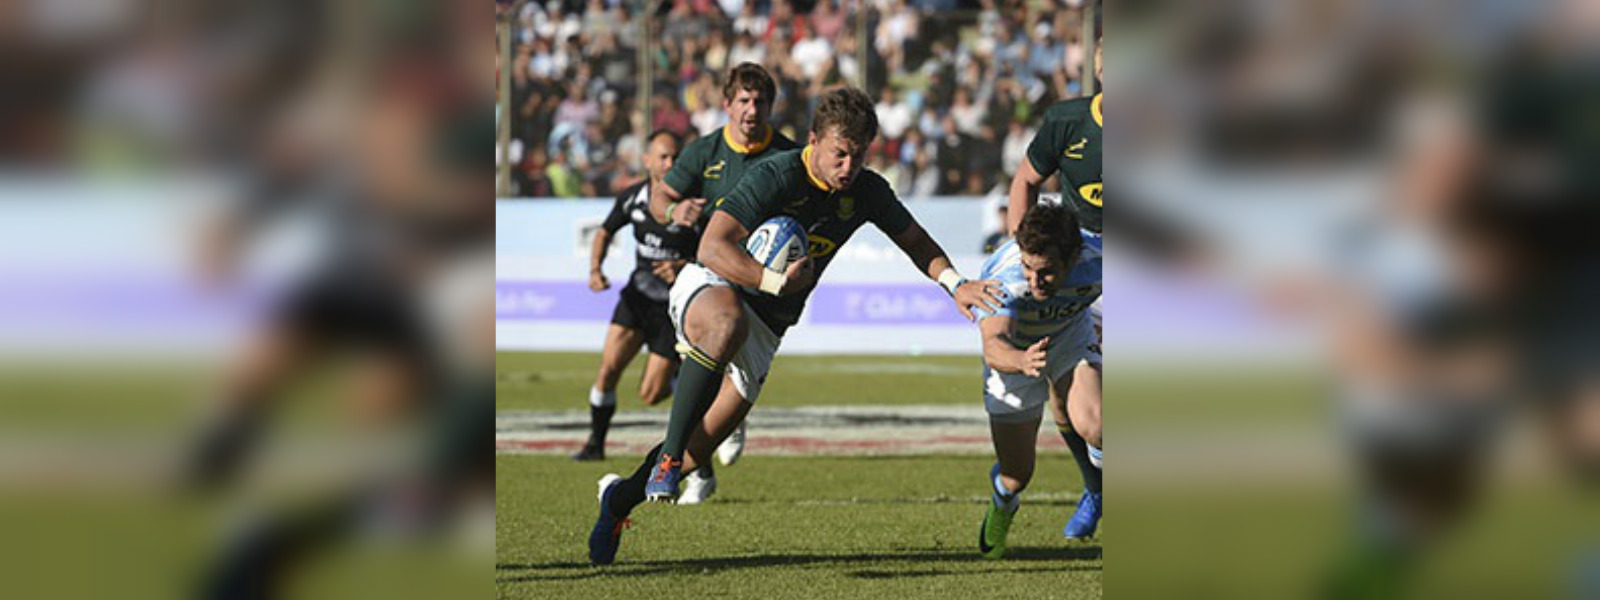 Springboks, Argentina ready for rugby battle